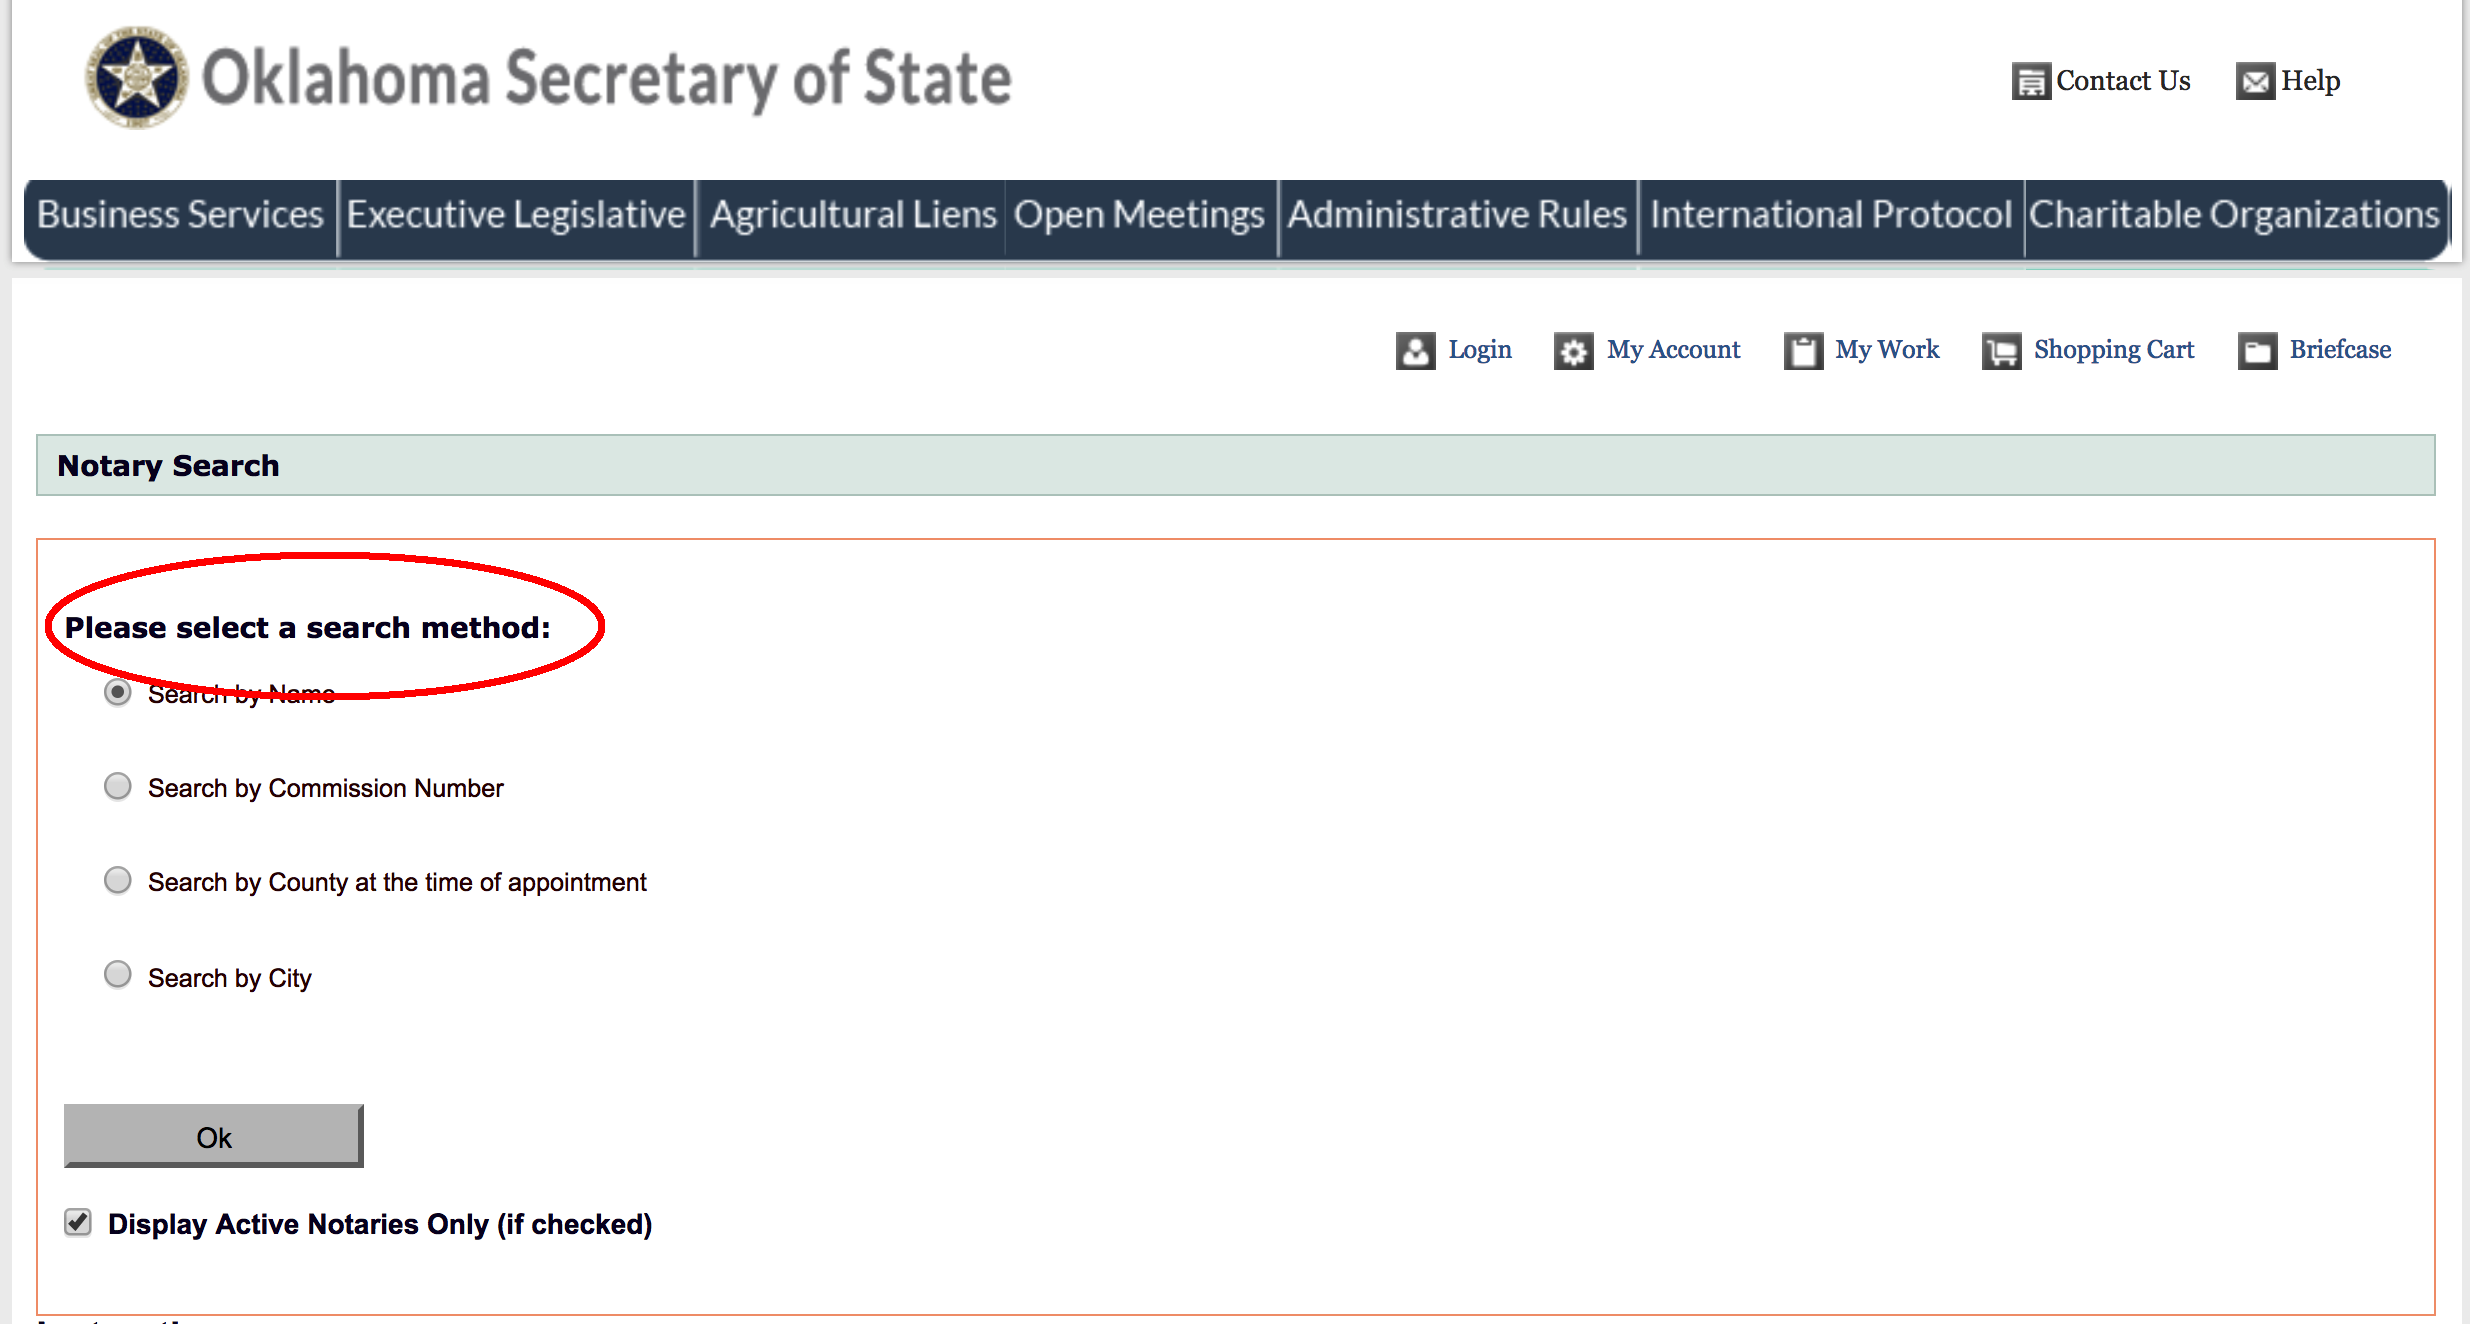 oklahoma secretary of state notary search methods page